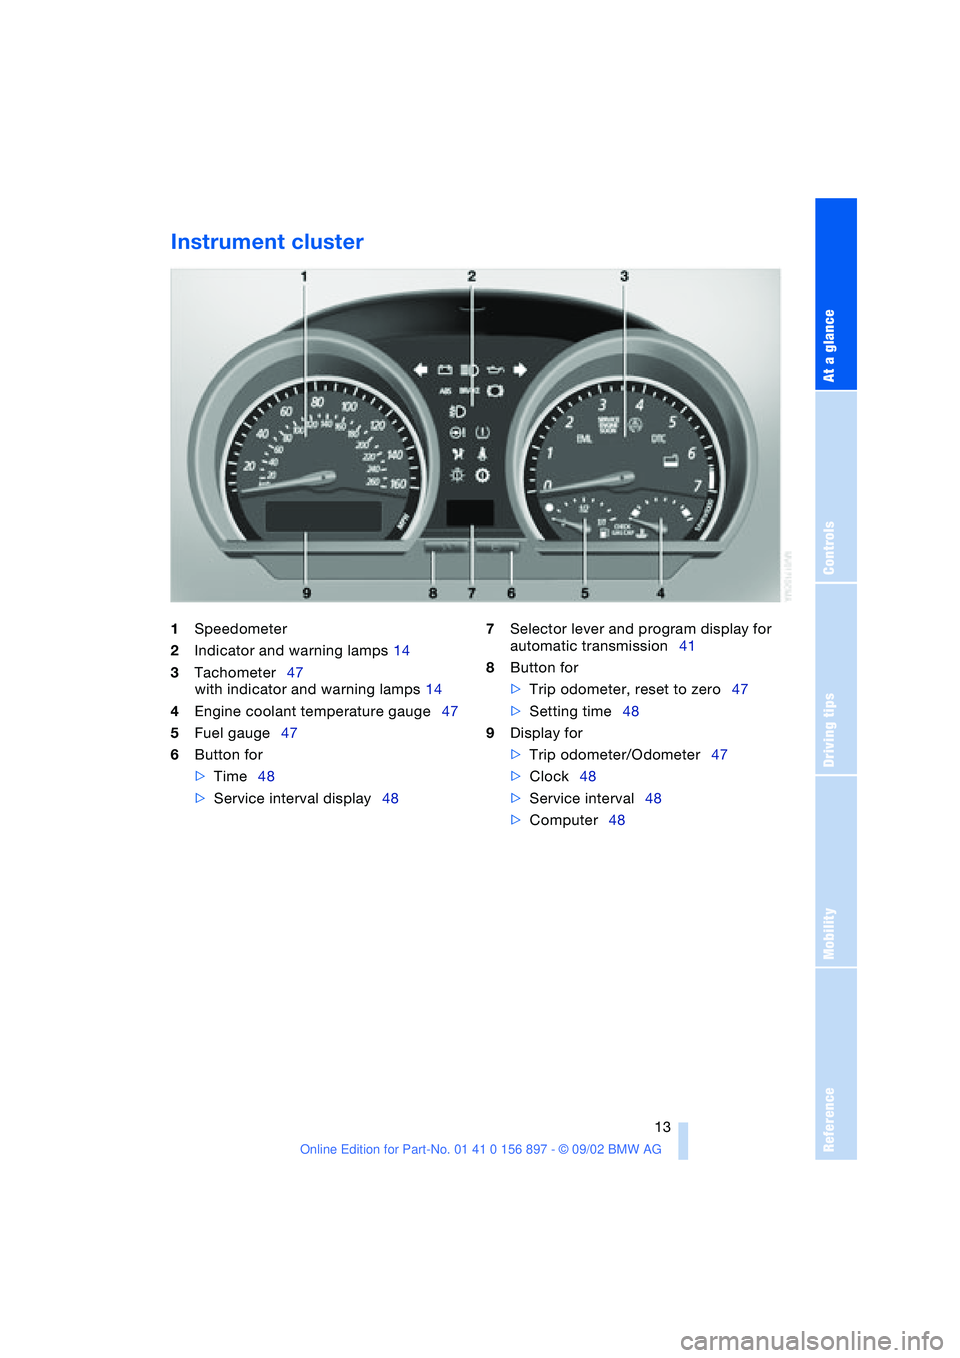 BMW 3.0i ROADSTER 2003  Owners Manual At a glance
Controls
Driving tips
Mobility
Reference
 13
Instrument cluster
1Speedometer
2Indicator and warning lamps 14
3Tachometer47
with indicator and warning lamps 14
4Engine coolant temperature g